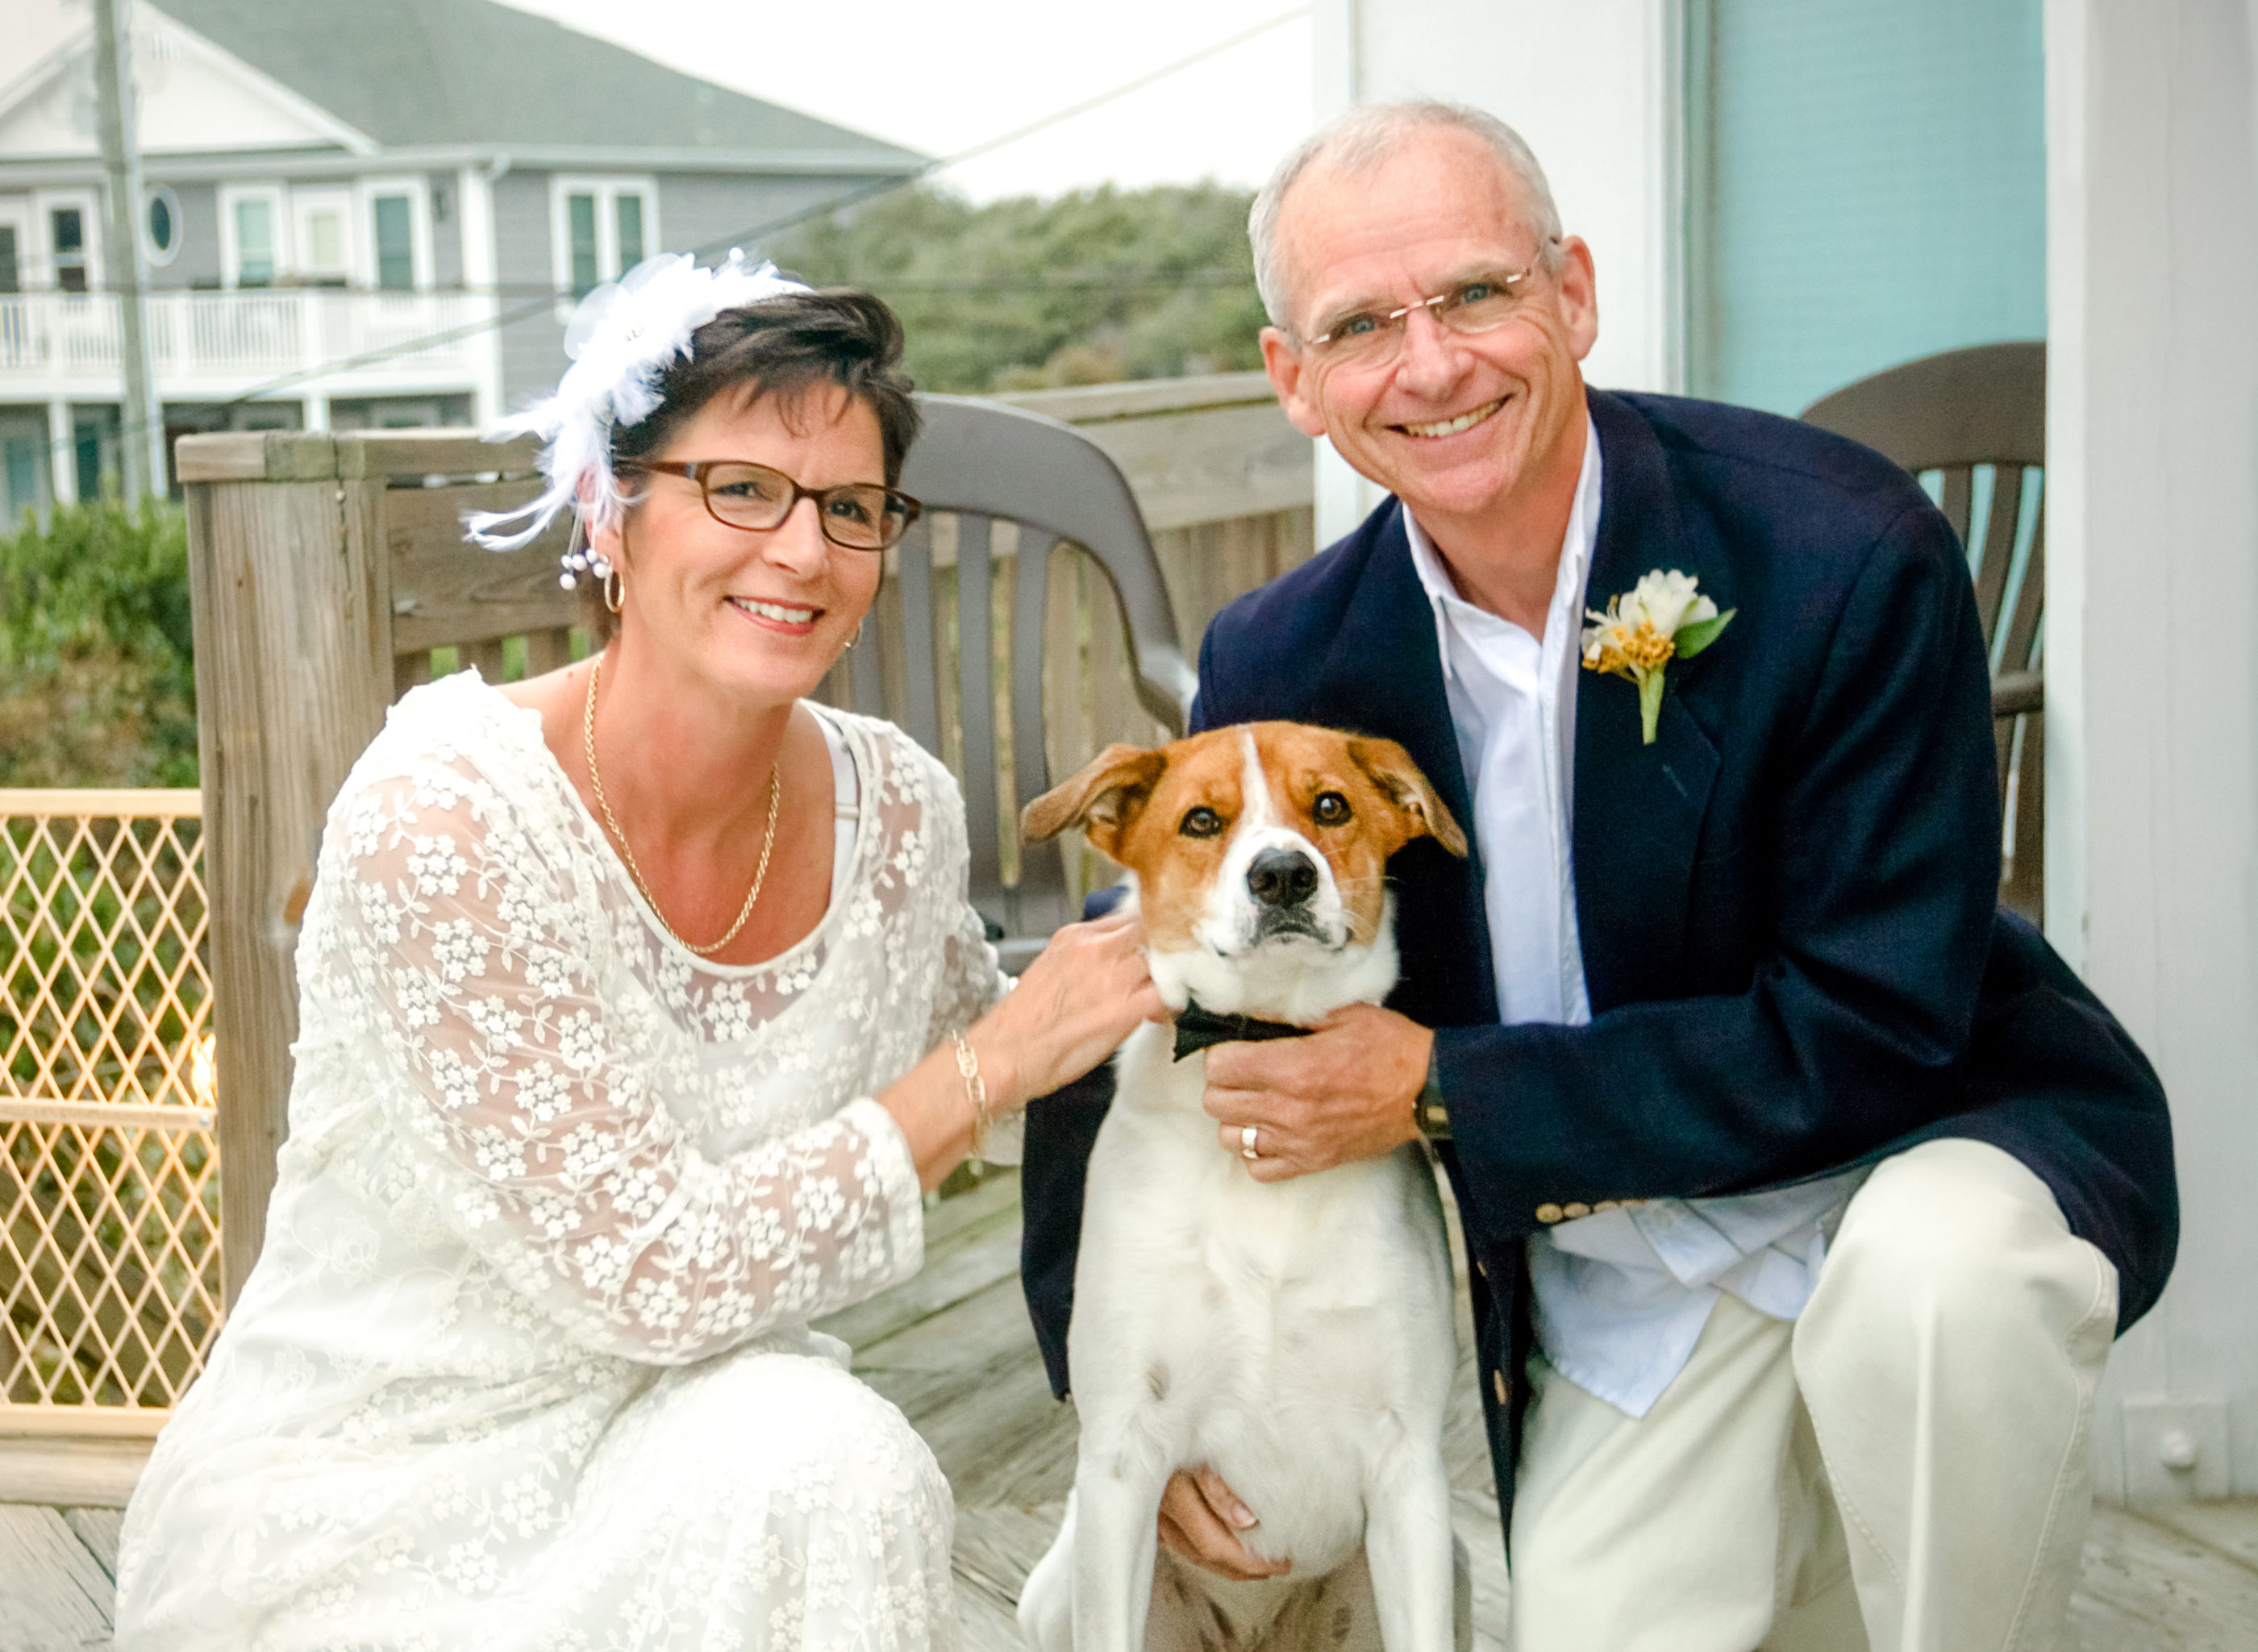 mature aged wedding couple and their dog who is the ring bearer posed for photo